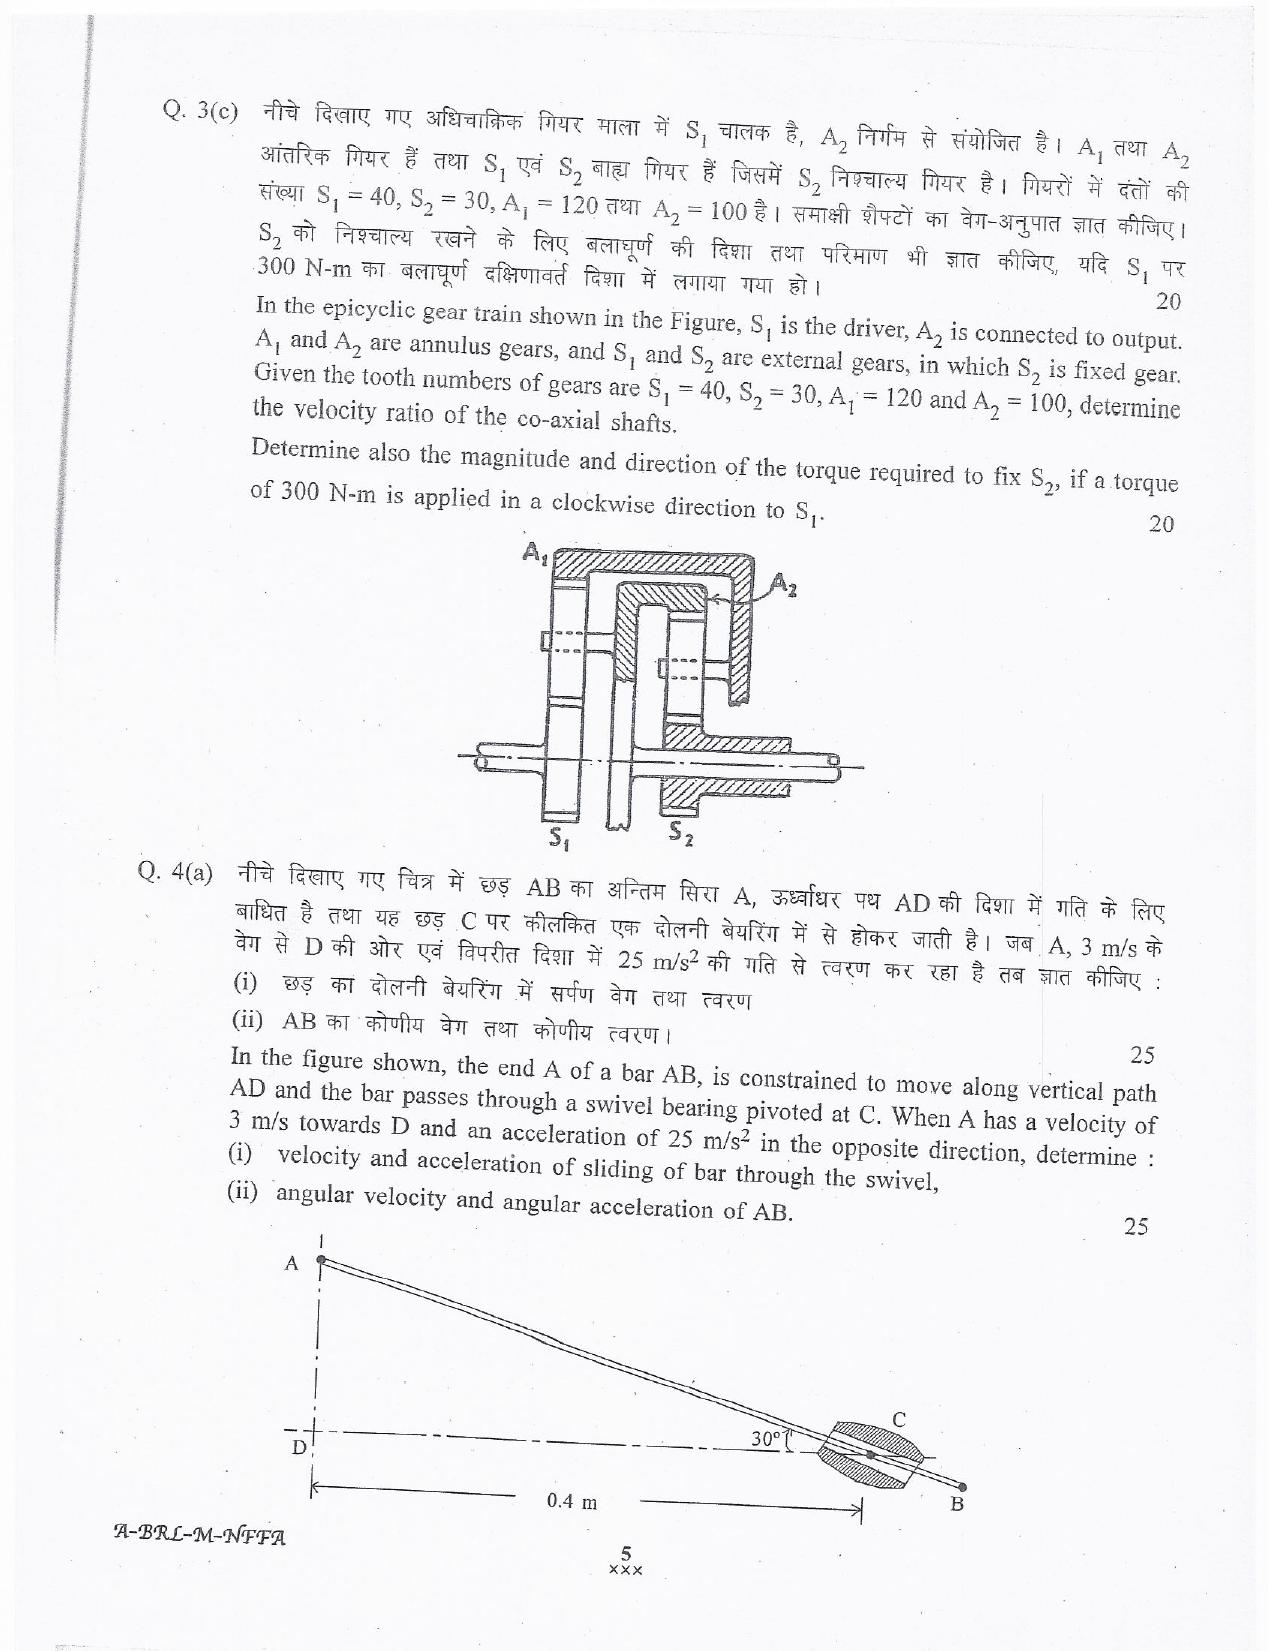 lakshadweep.gov.in Mechanical Engineering Question Papers - Page 5